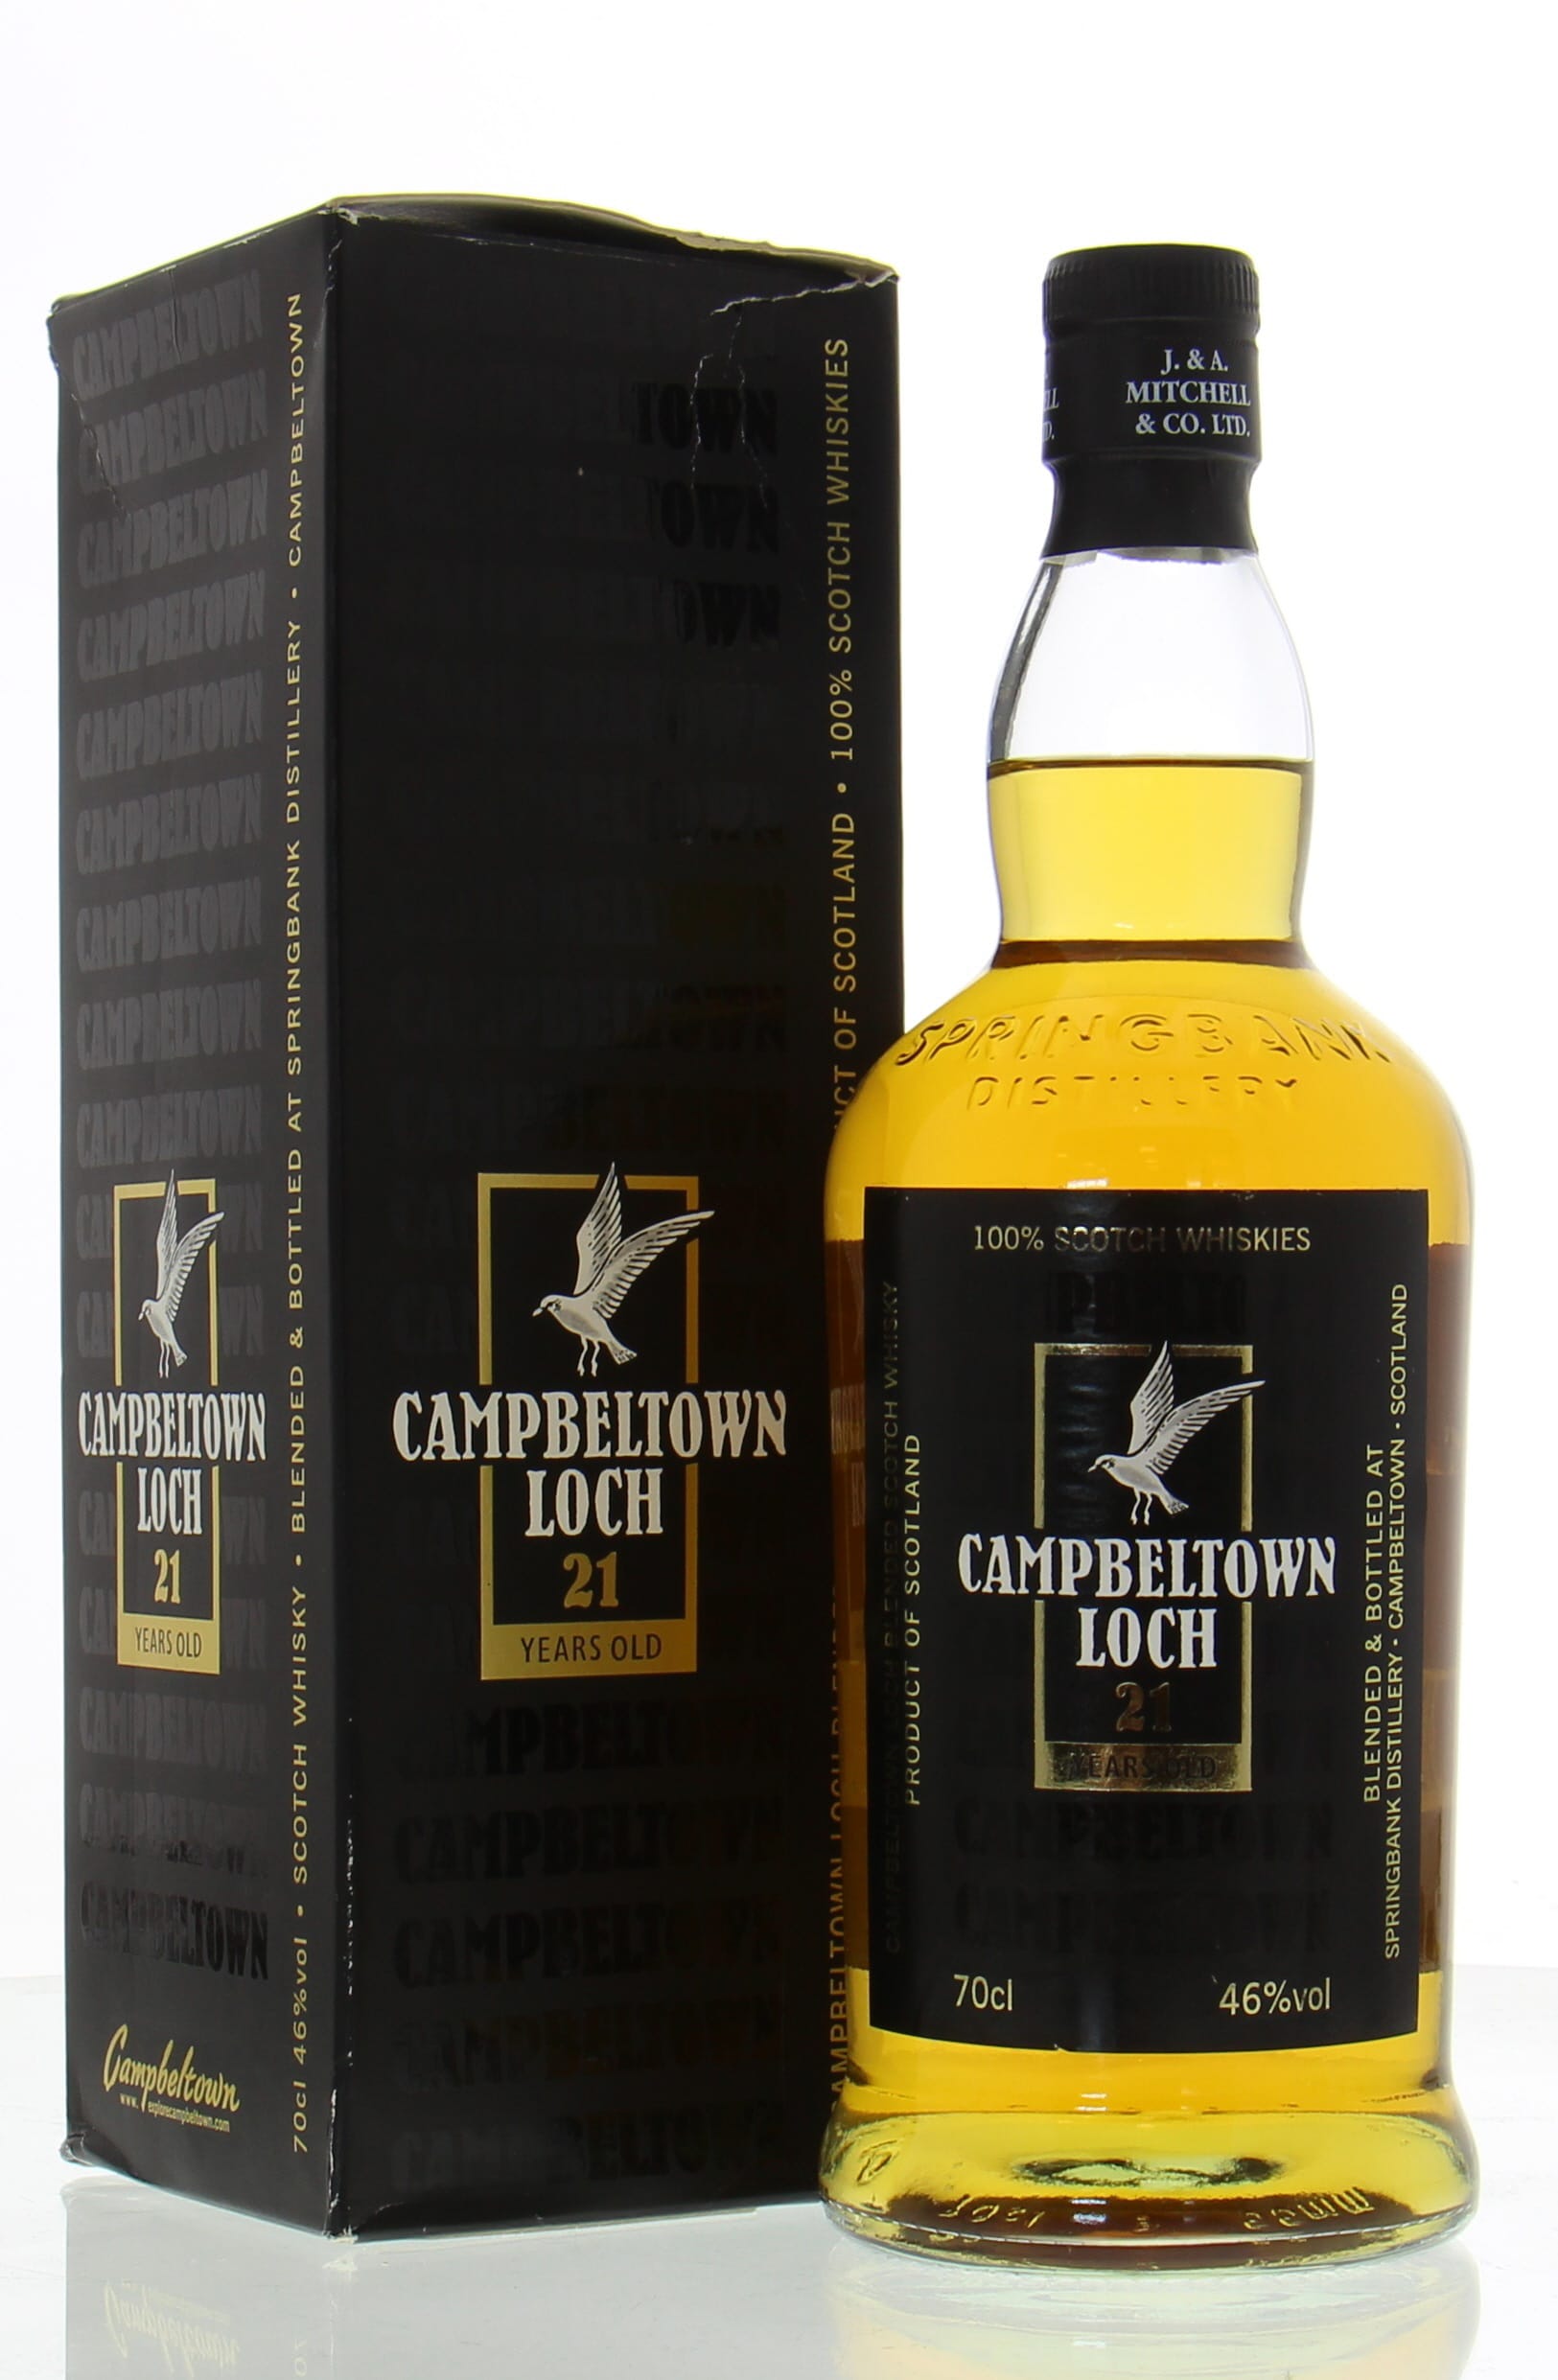 Springbank - Campbeltown Loch 21 Years old 46% NV